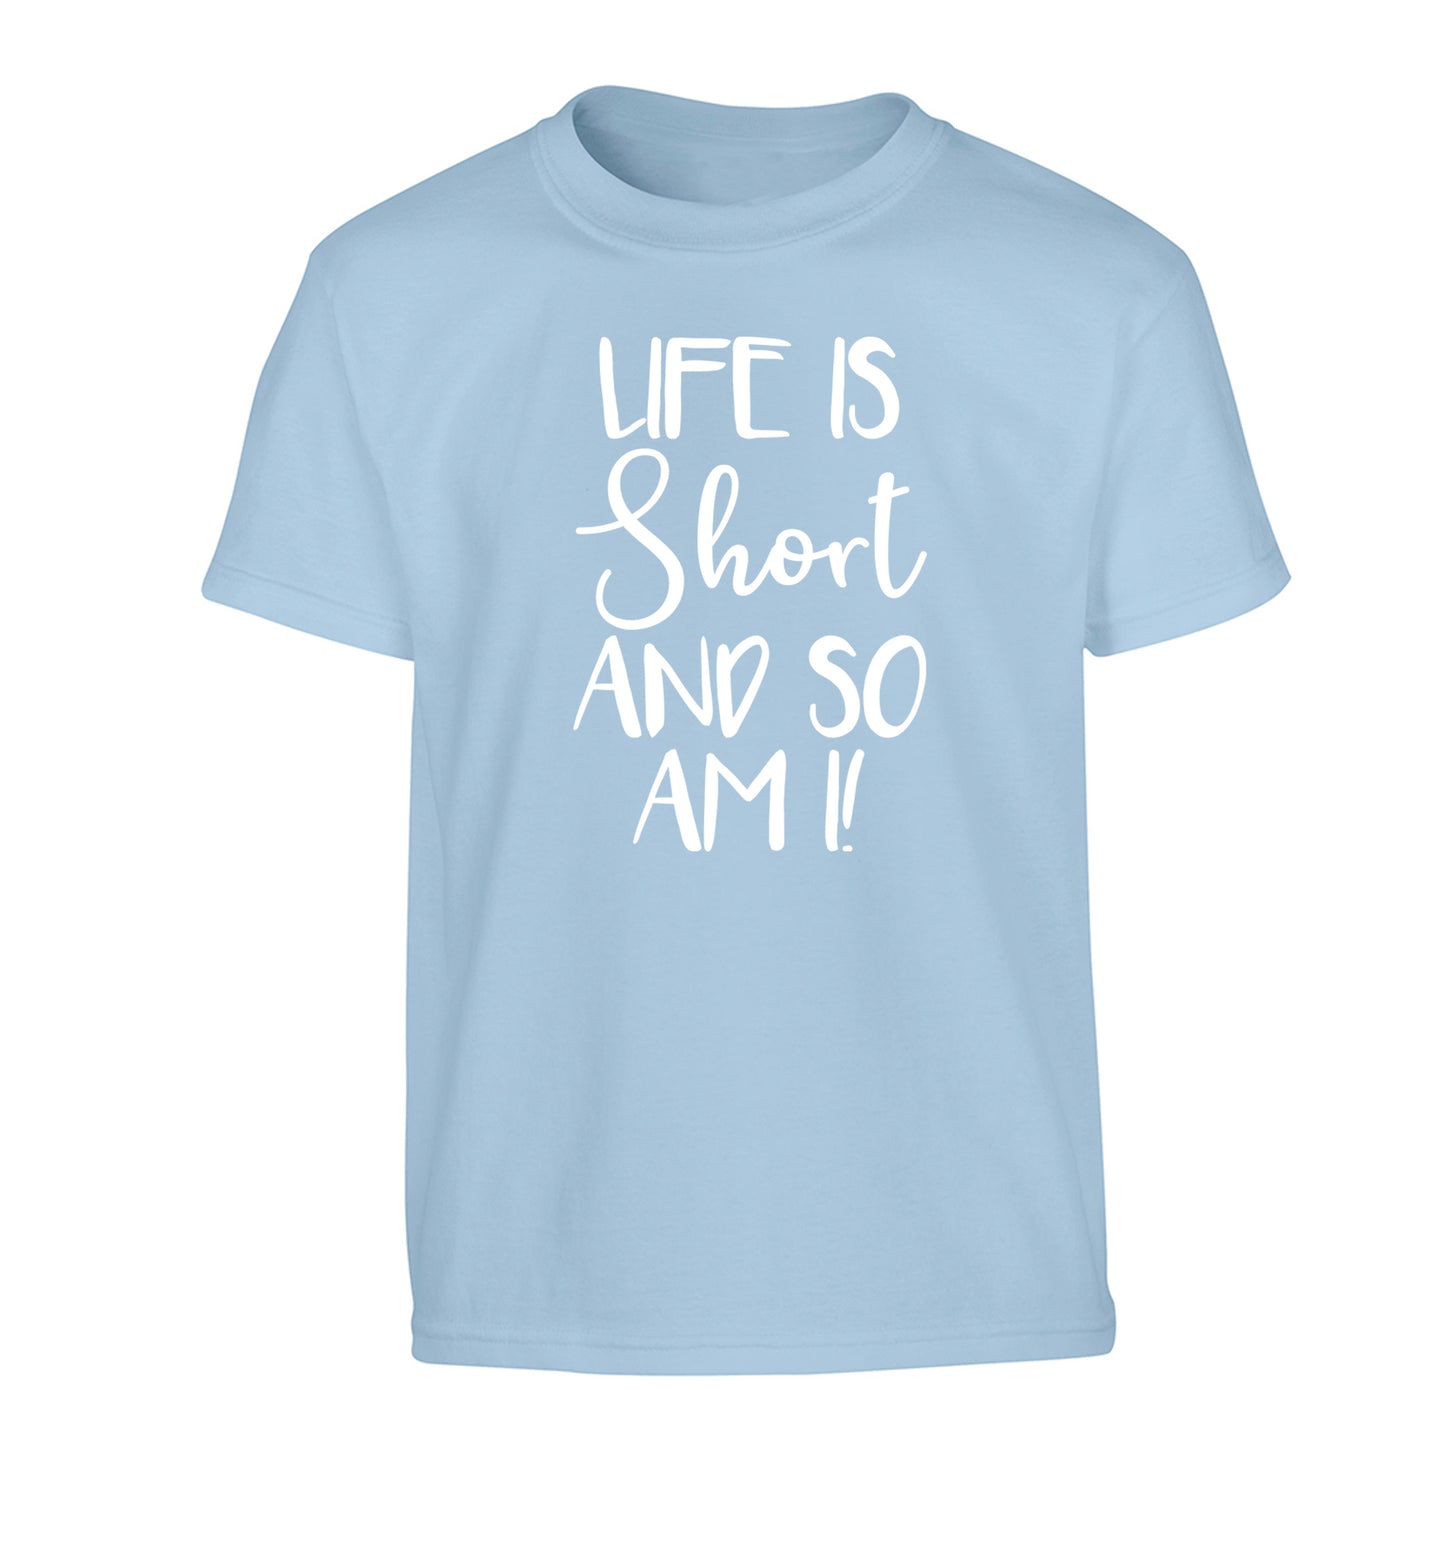 Life is short and so am I! Children's light blue Tshirt 12-13 Years